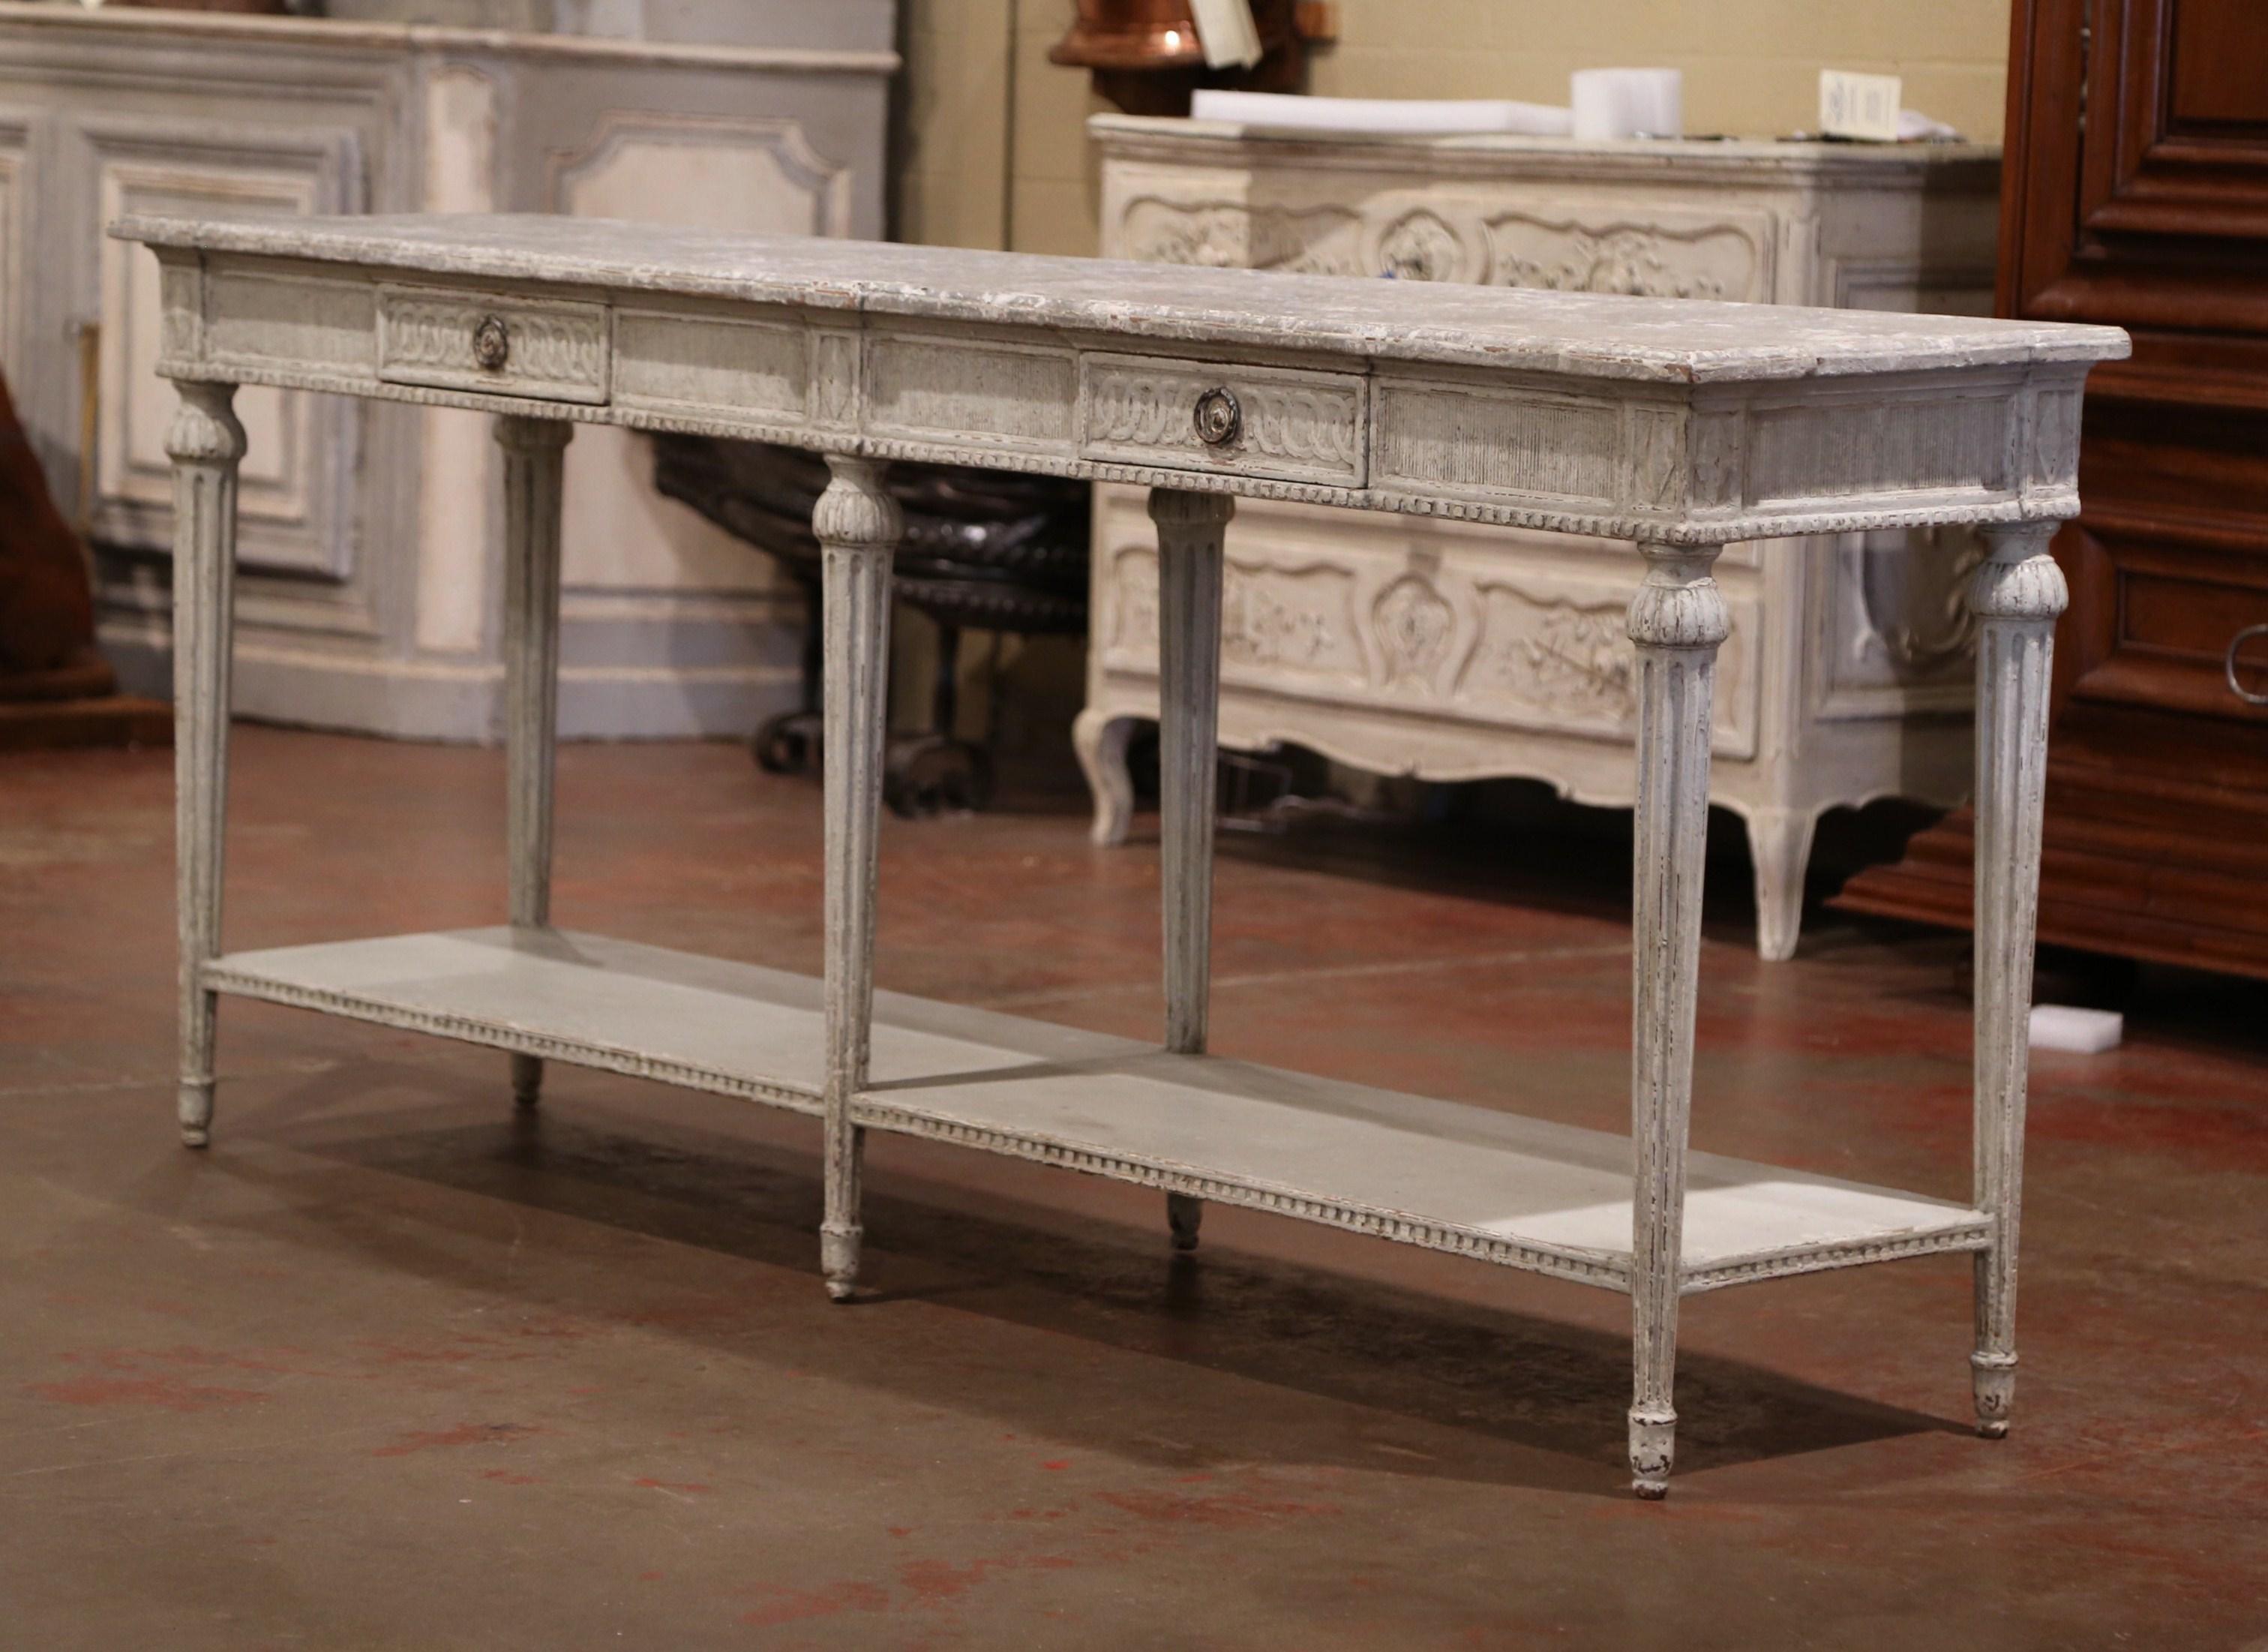 This elegant antique console tables was created in France, circa 1880. The long grey painted table stand on six carved and tapered legs over a carved apron embellished with floral medallions on each corner. The console has two drawers across the